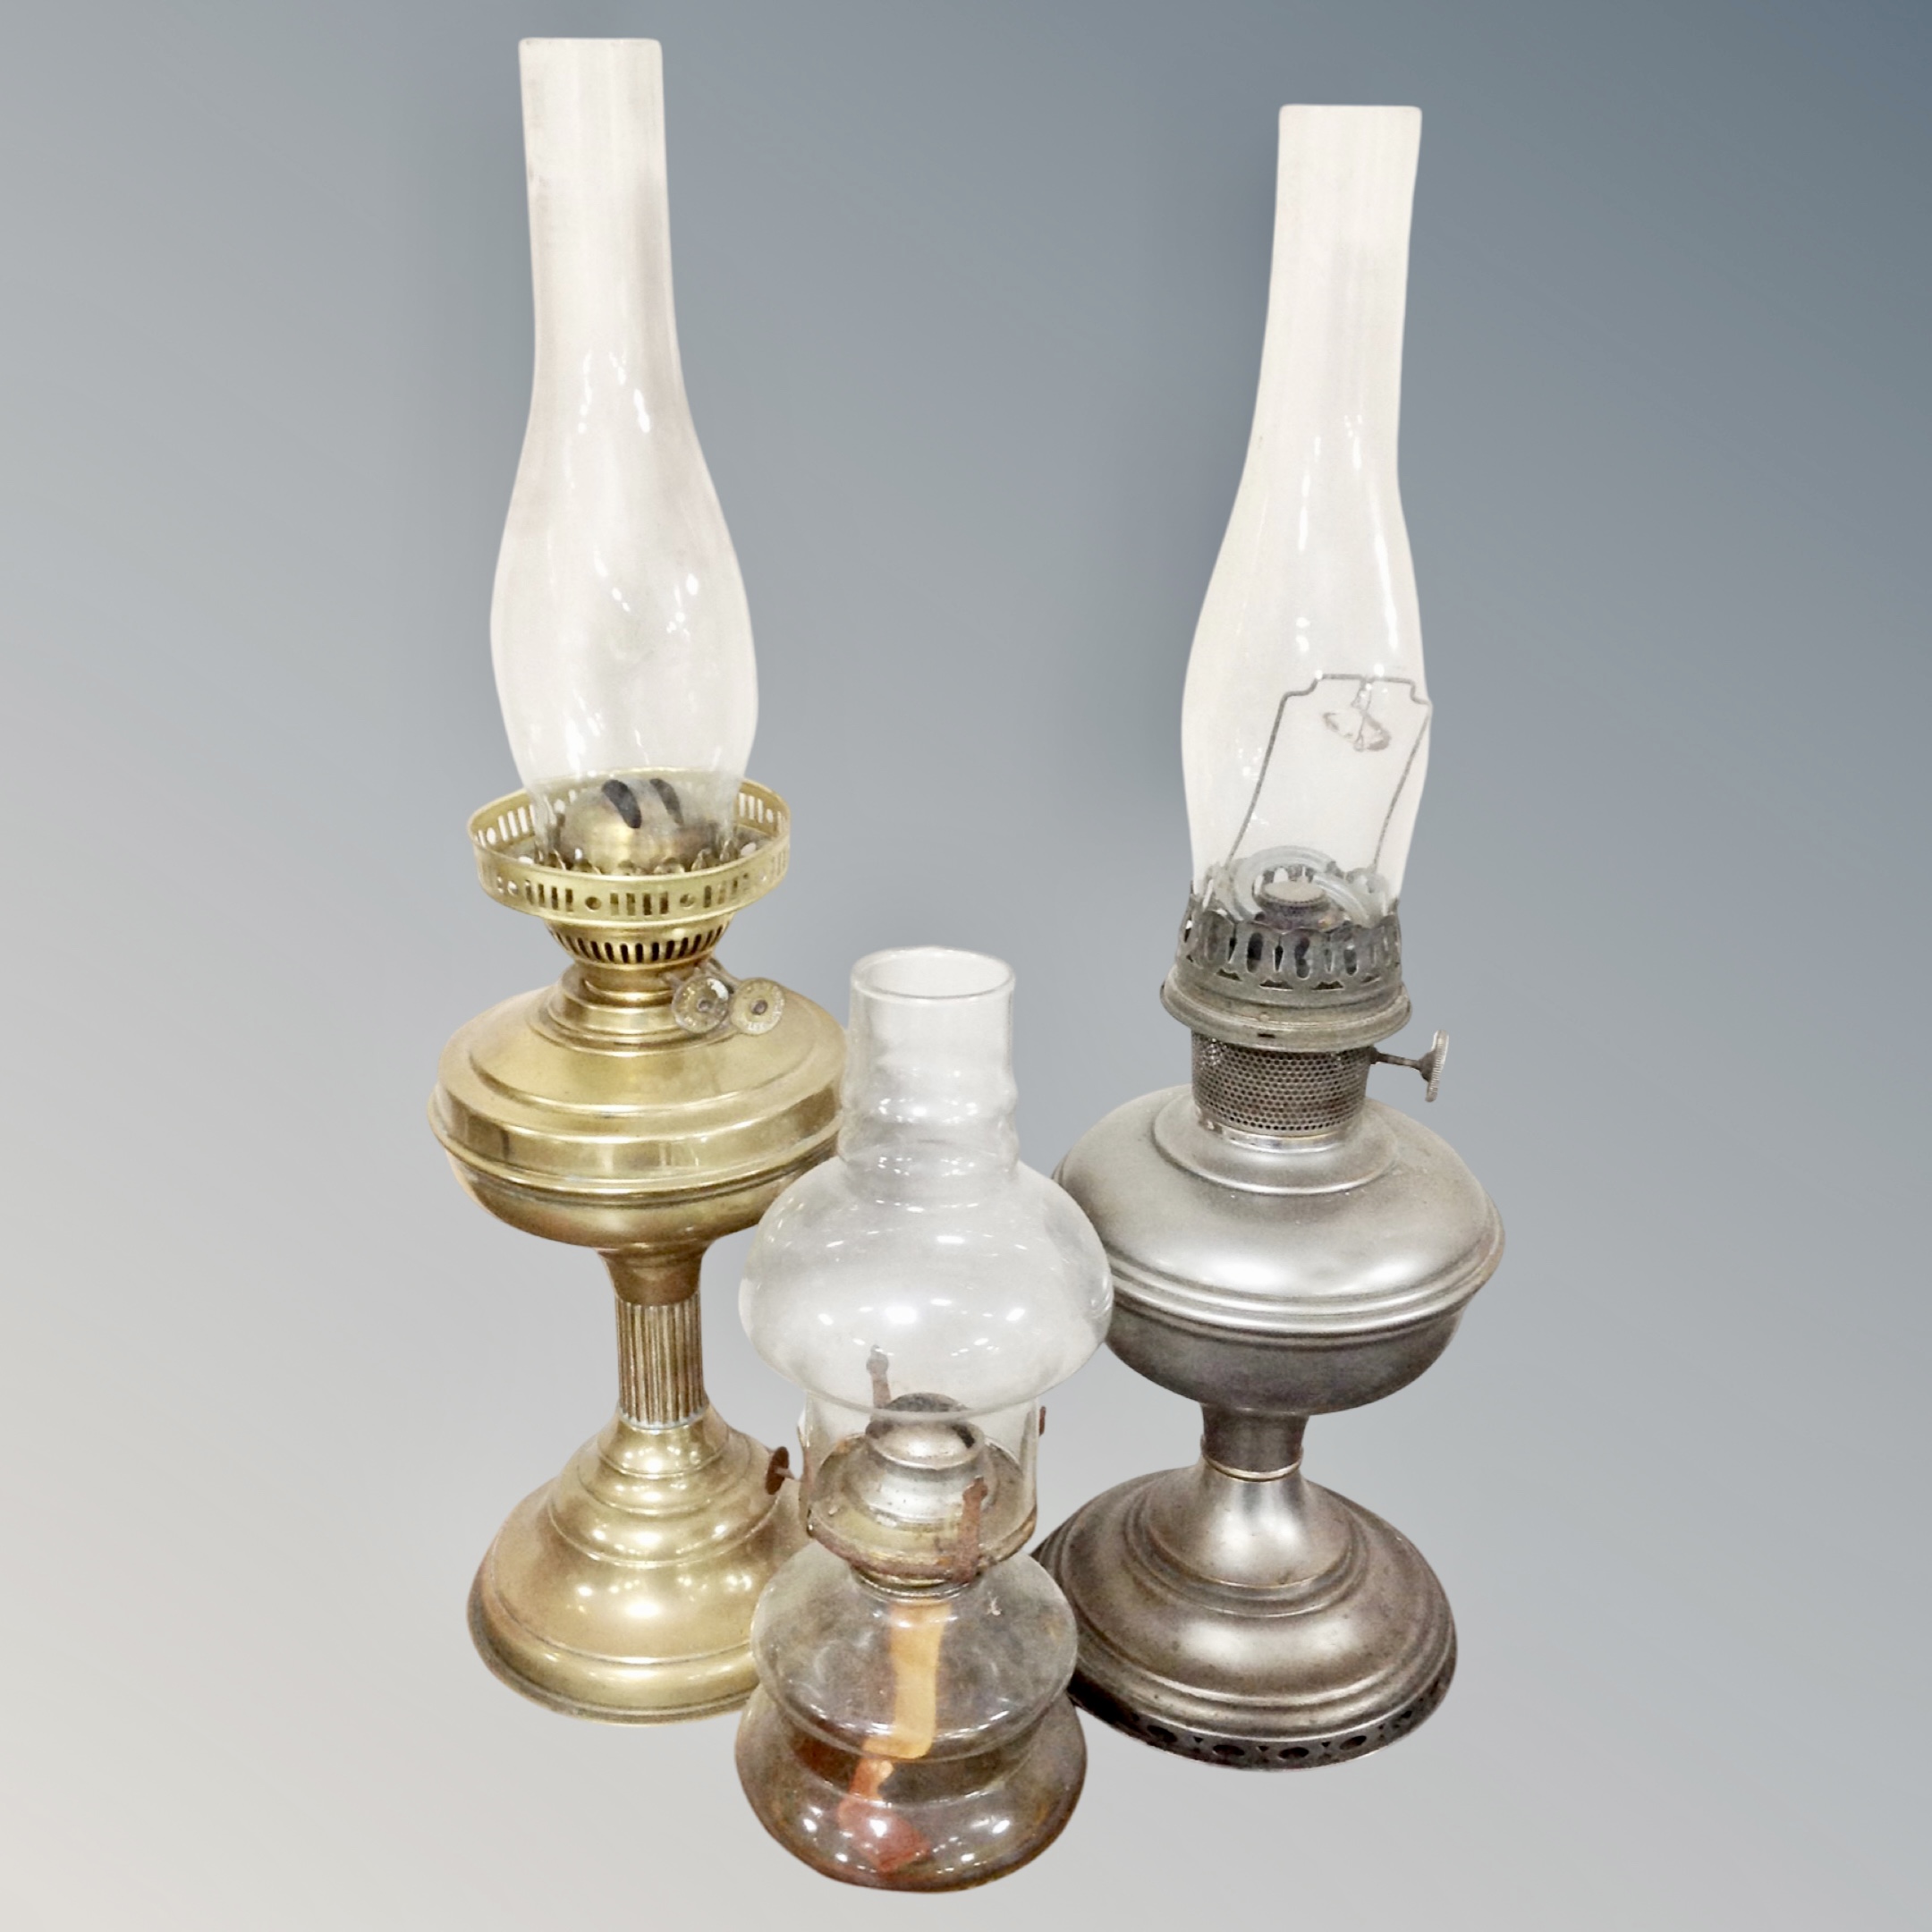 A Victorian brass oil lamp with cranberry glass reservoir together with three further oil lamps in